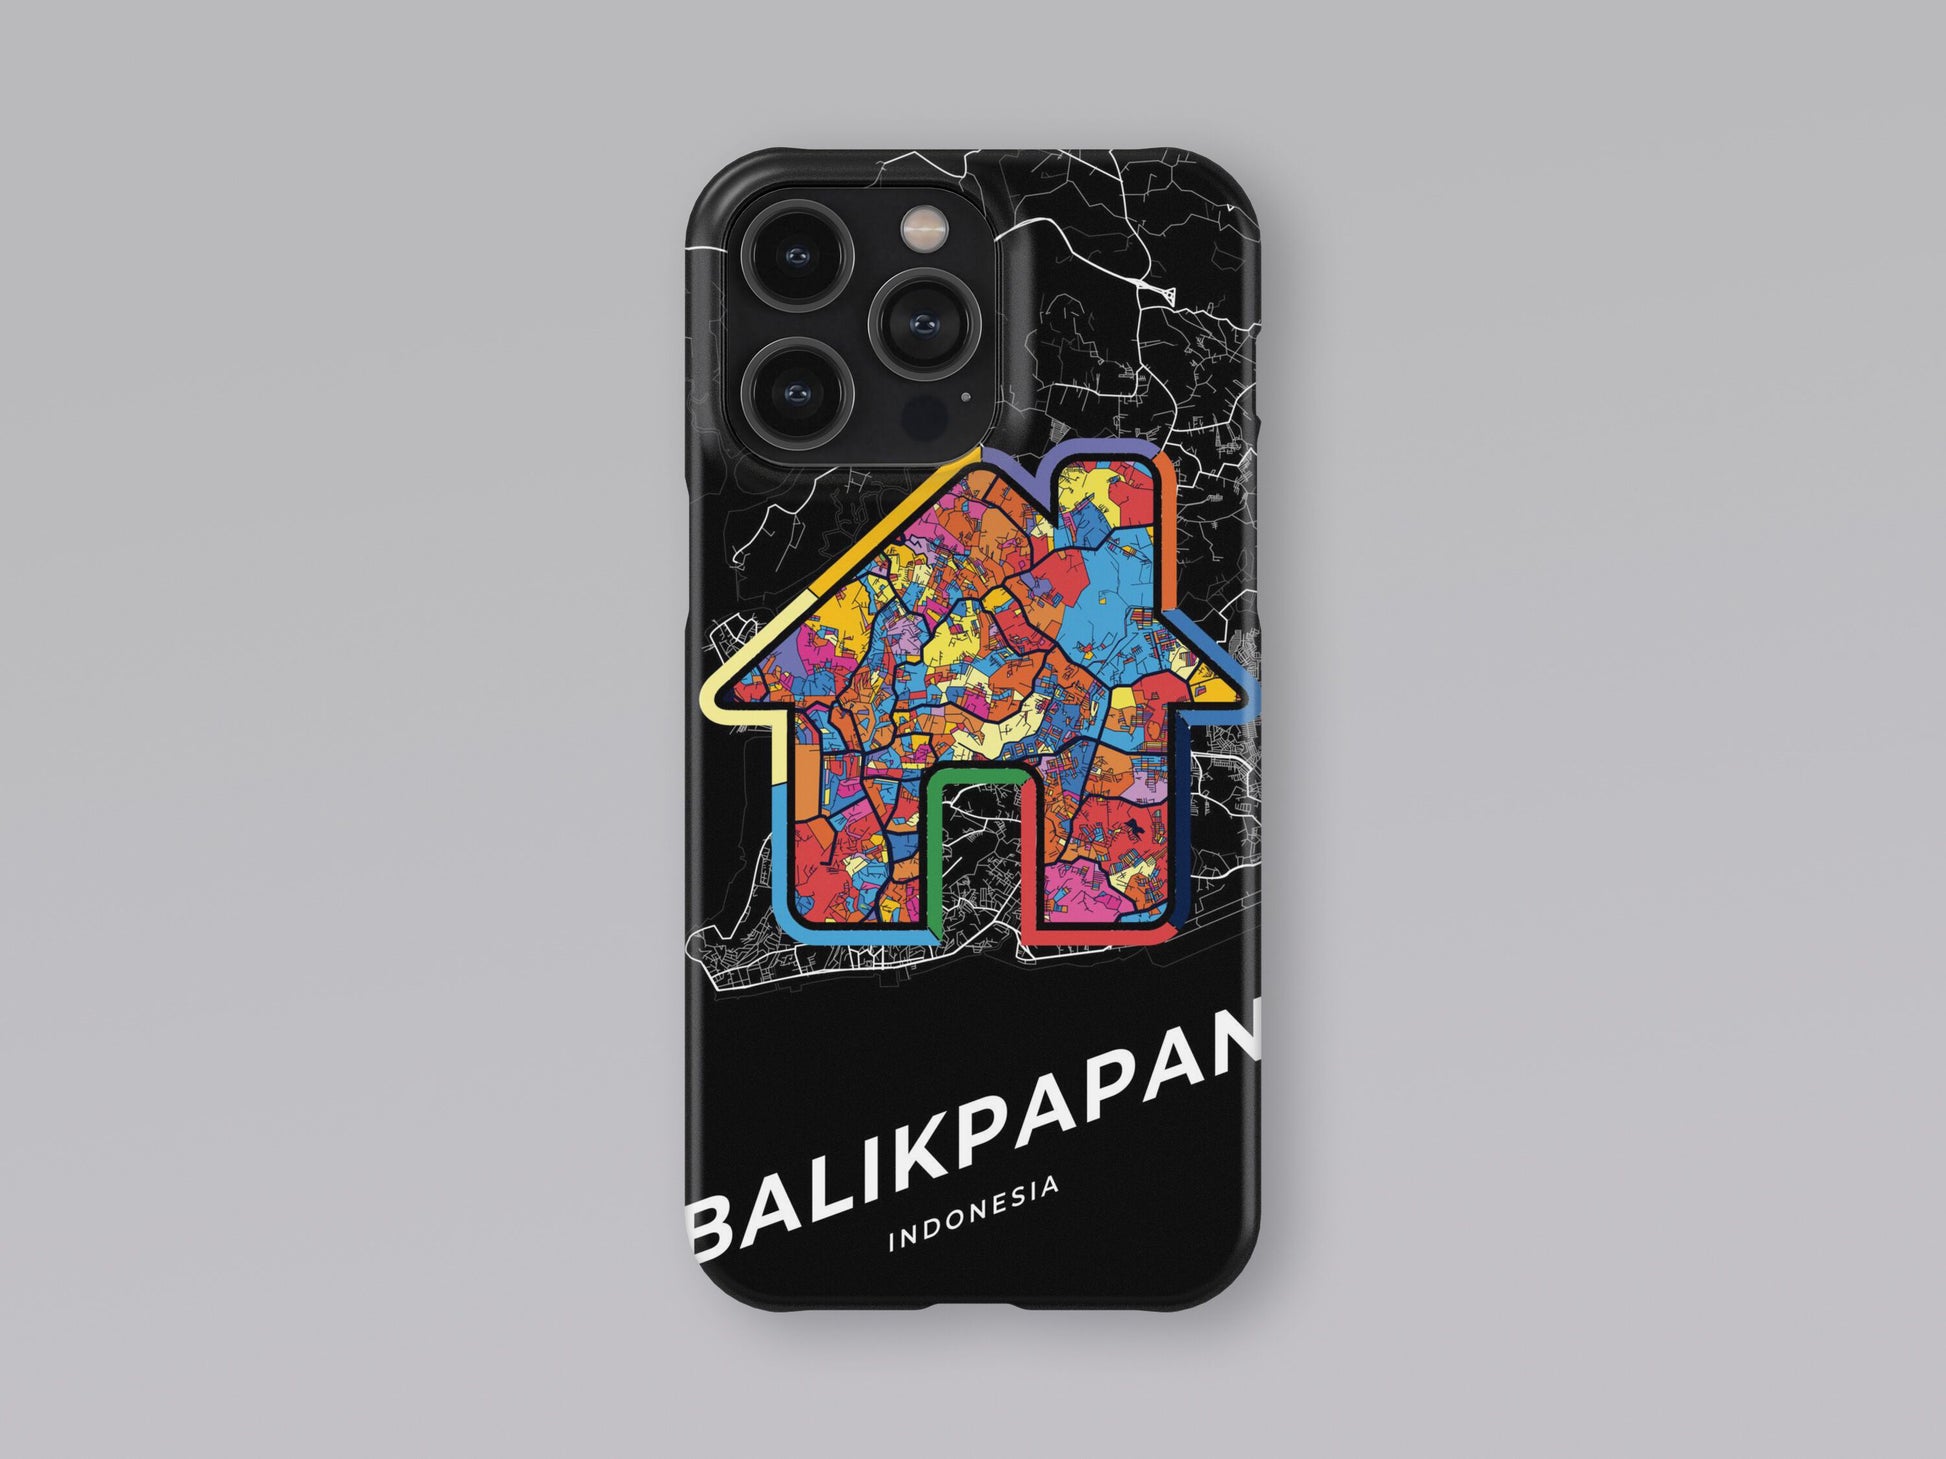 Balikpapan Indonesia slim phone case with colorful icon. Birthday, wedding or housewarming gift. Couple match cases. 3